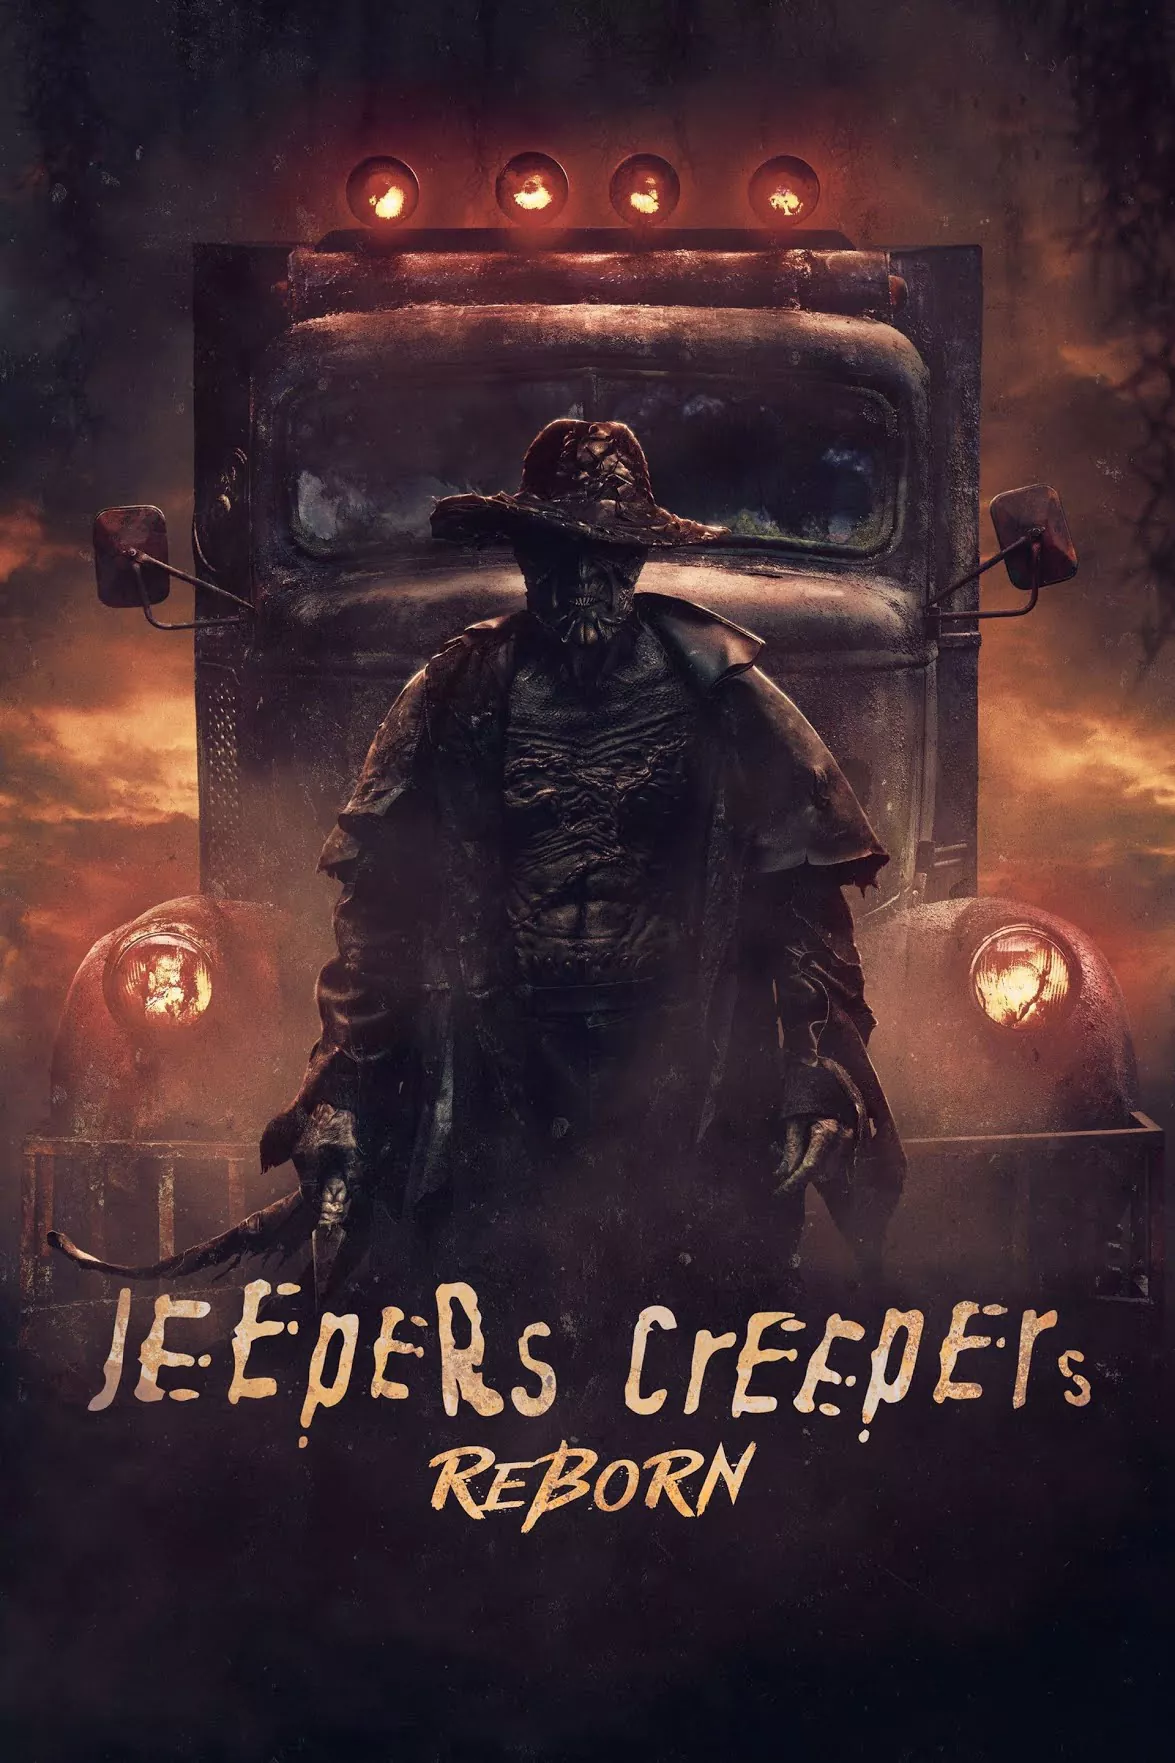 Trailer Από Το "Jeepers Creepers Reborn"